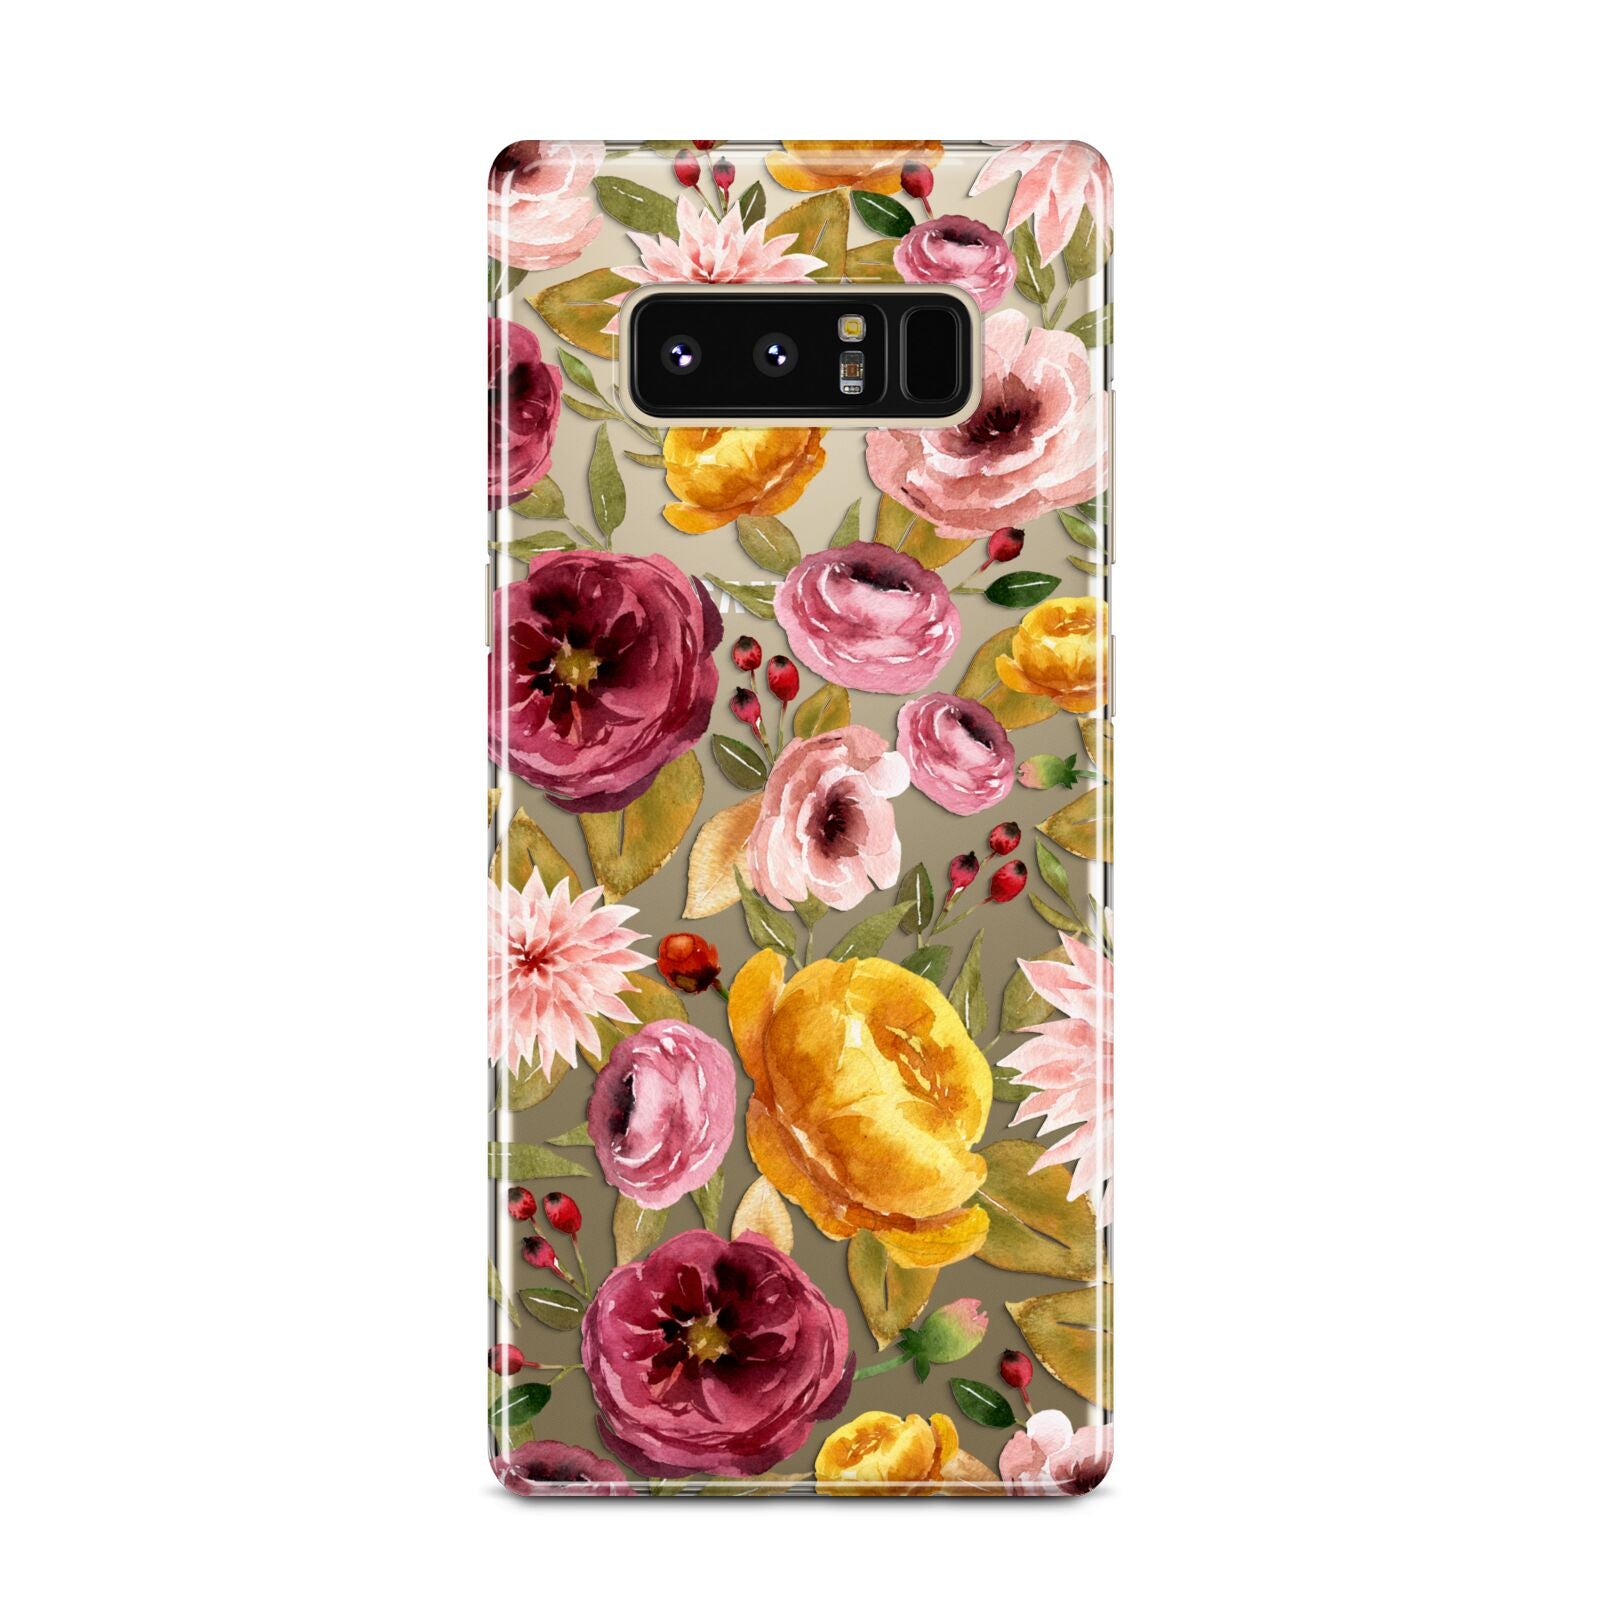 Pink and Mustard Floral Samsung Galaxy Note 8 Case